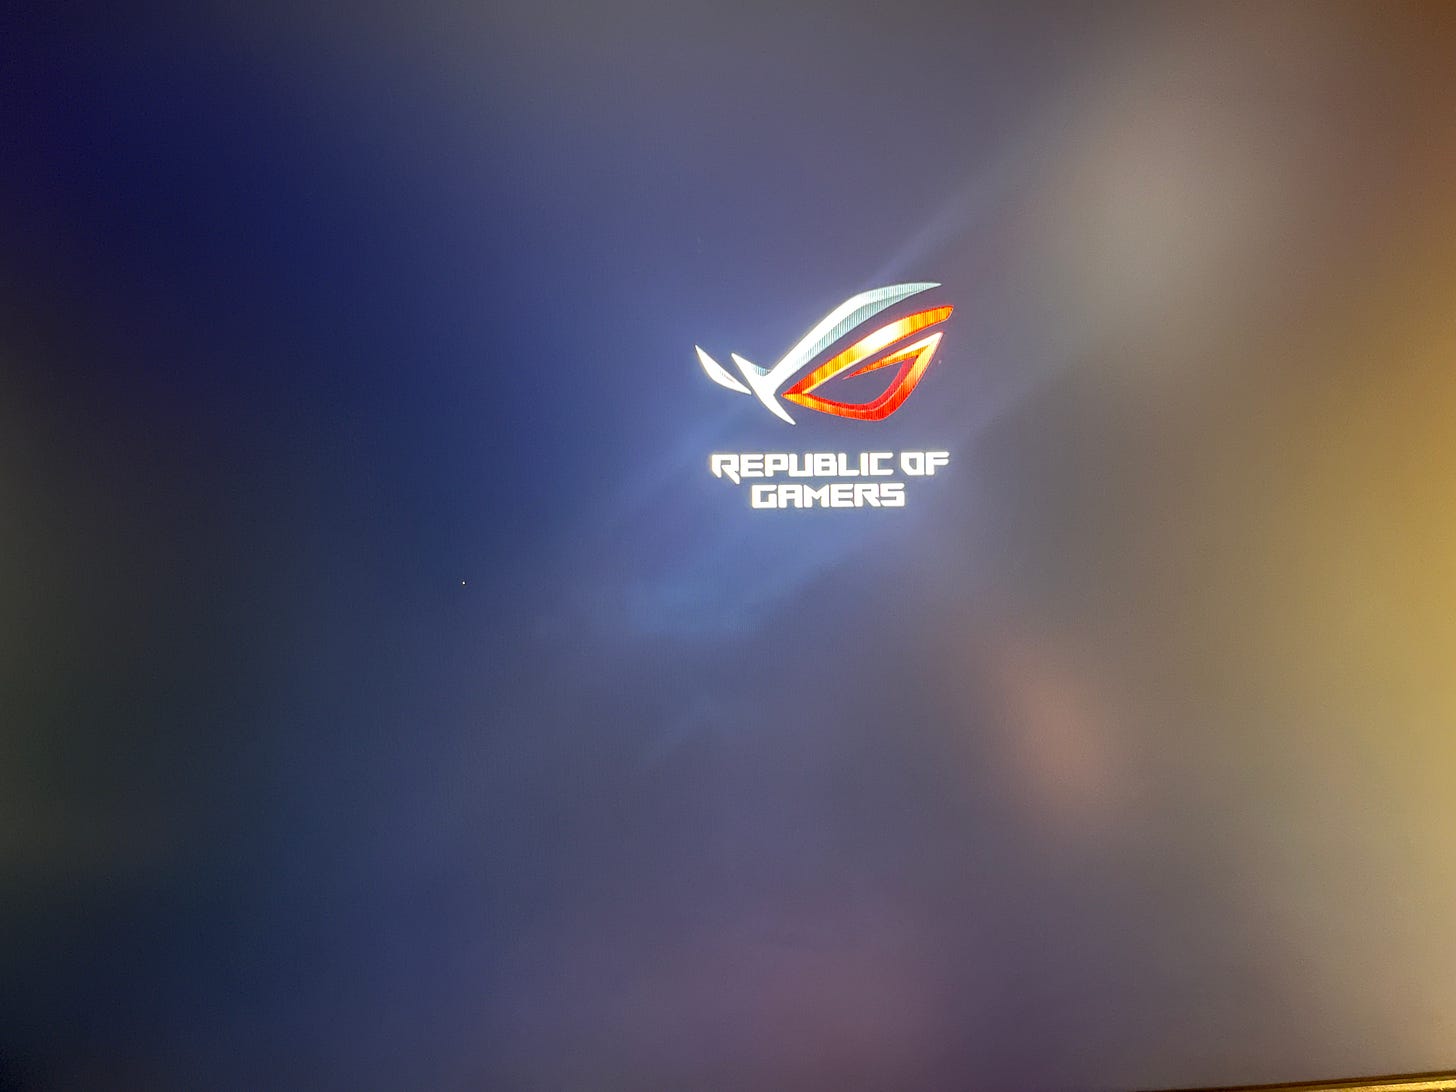 Republic of Gamers logo on a mostly black screen